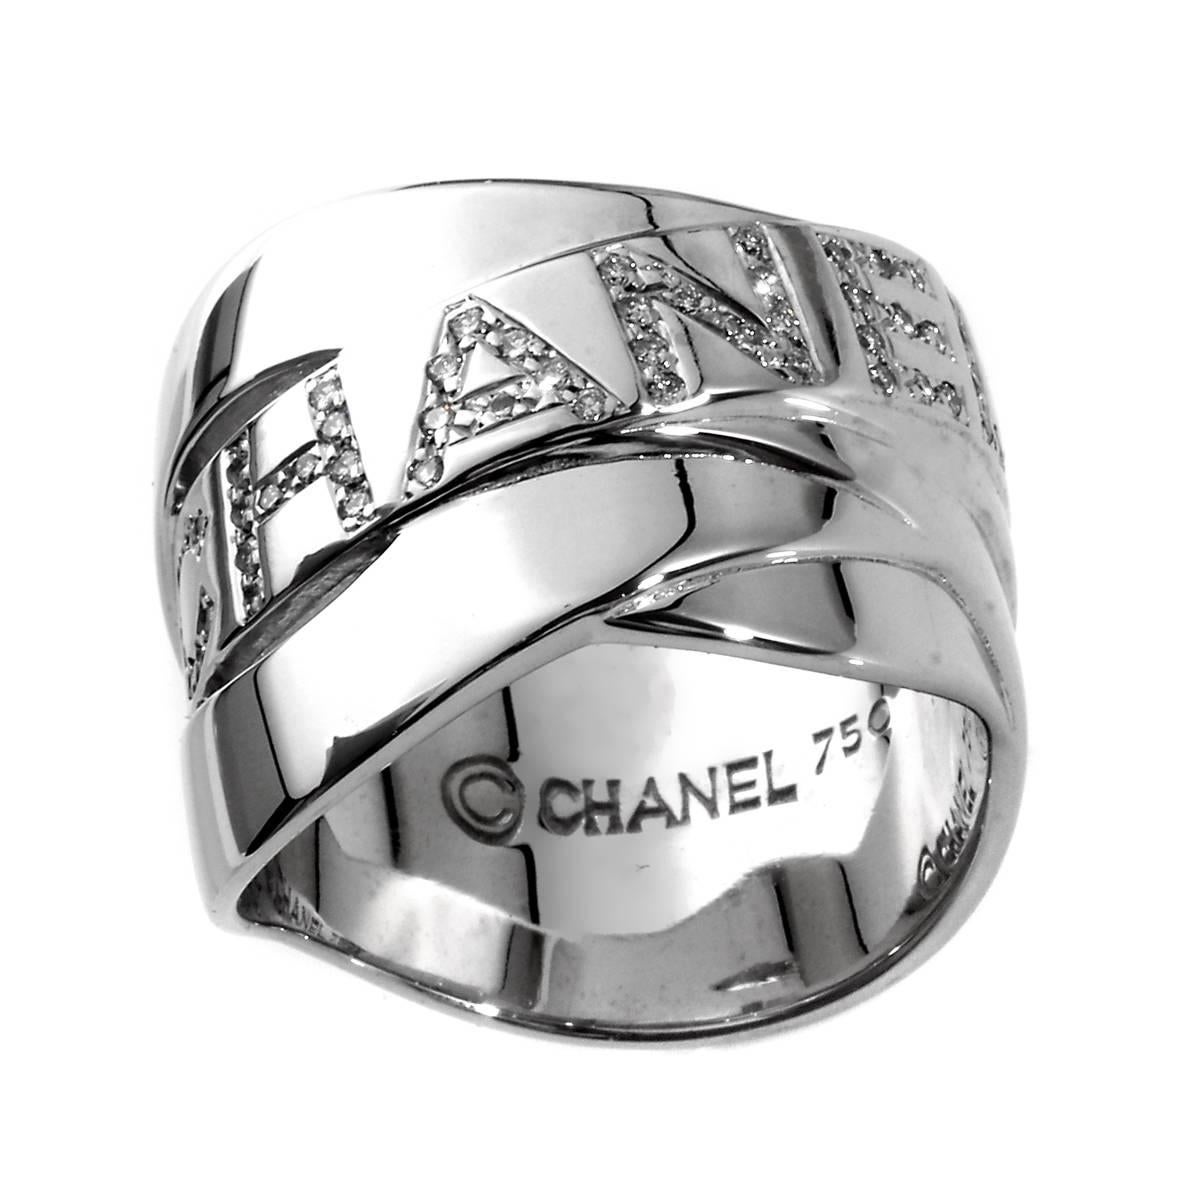 A chic Chanel cocktail ring featuring the iconic Chanel motif adorned with round brilliant cut diamonds in 18k white gold.

Size 6